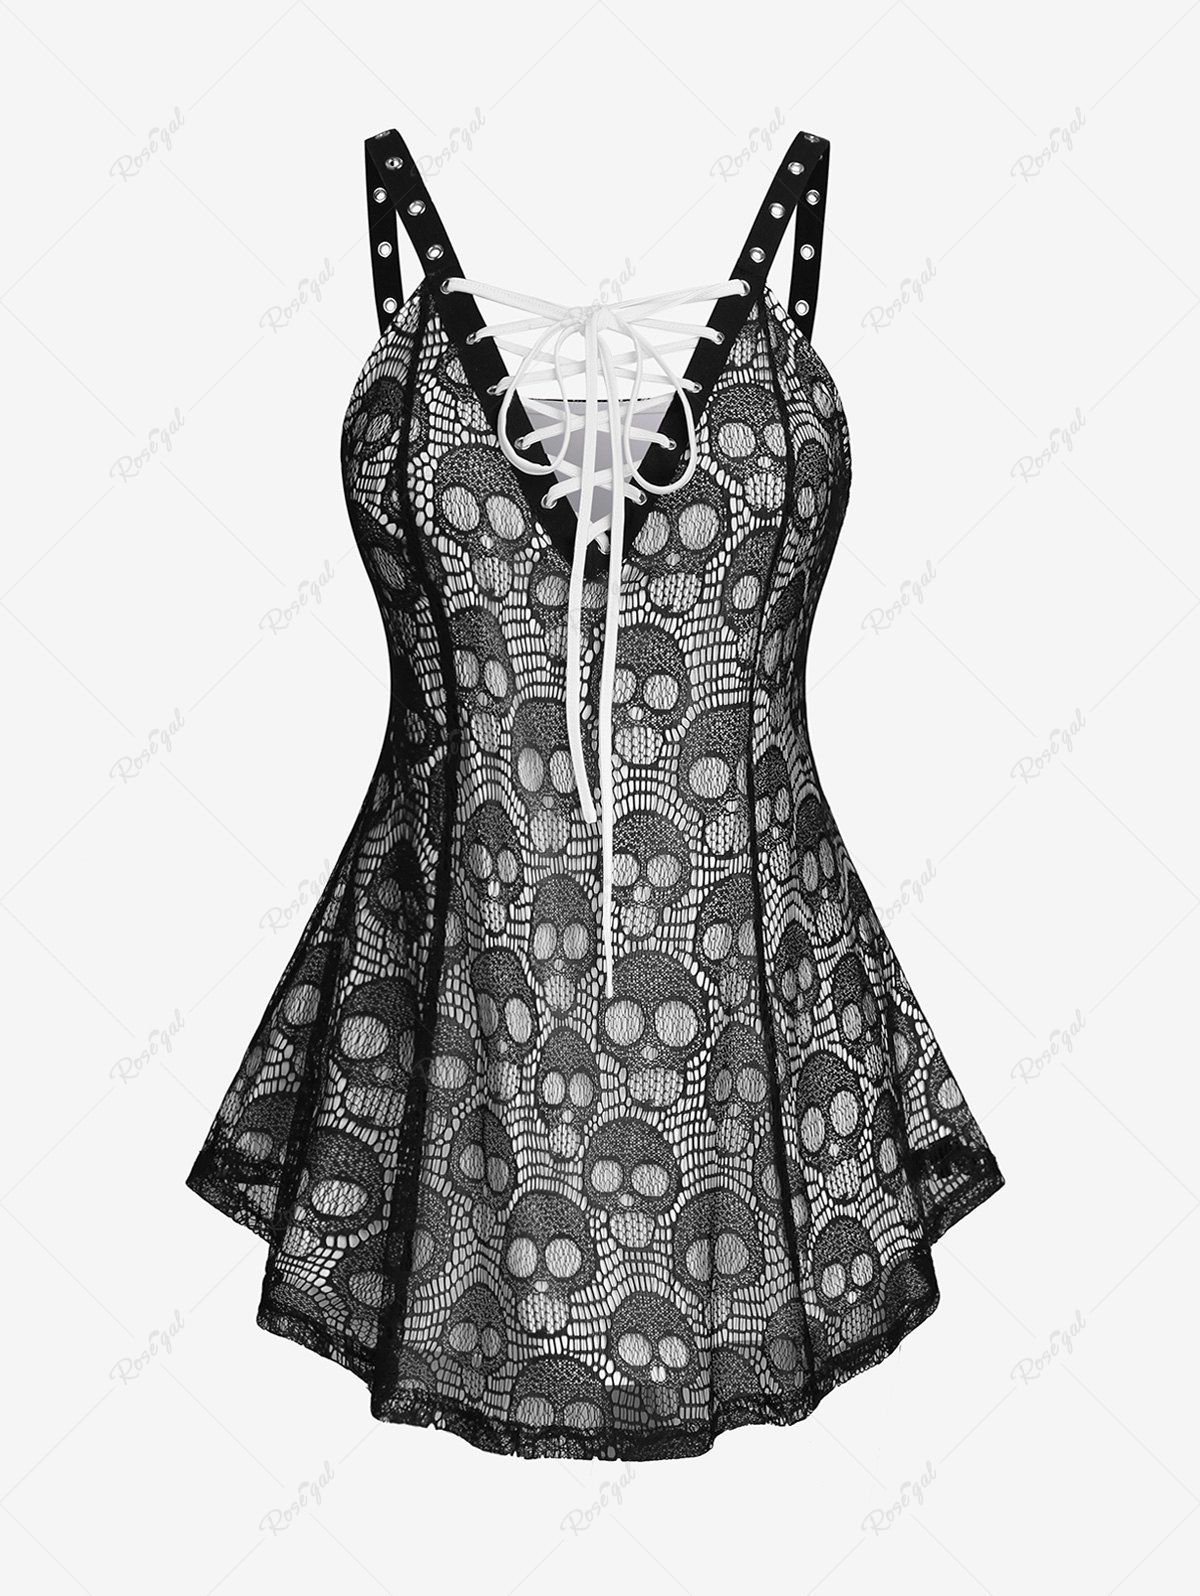 Chic Gothic Skulls Lace Up Grommet Colorblock Tank Top  